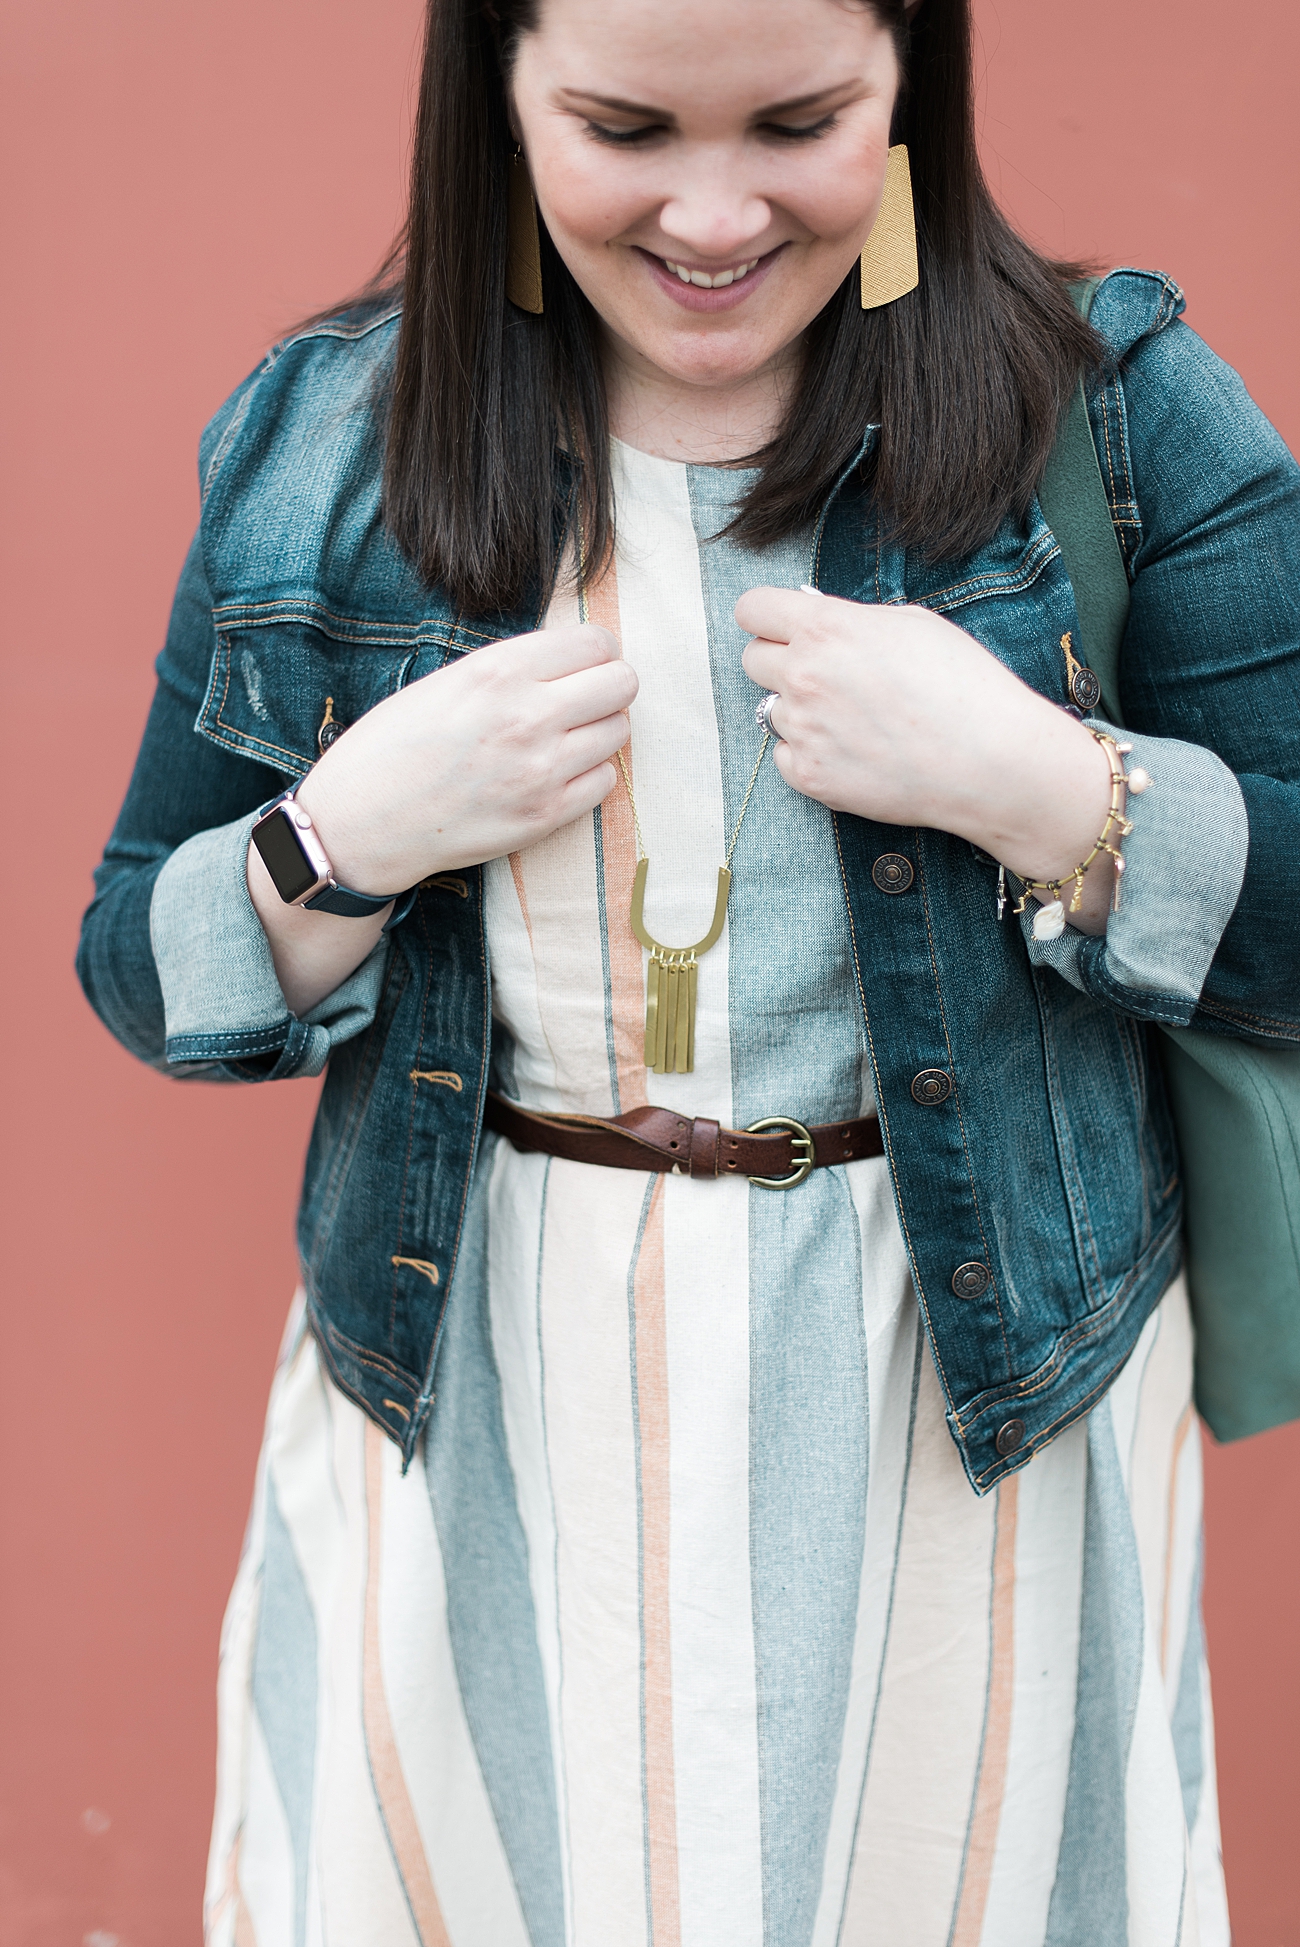 Fair Trade Fashion Blogger - Spring 2019 - Mata Traders Lovely Lines Dress Pastel Stripes, The Root Collective Lee Boots in Merlot, Rover & Kin necklace, Tribe Alive tote, Nickel & Suede earrings, denim jacket (5)